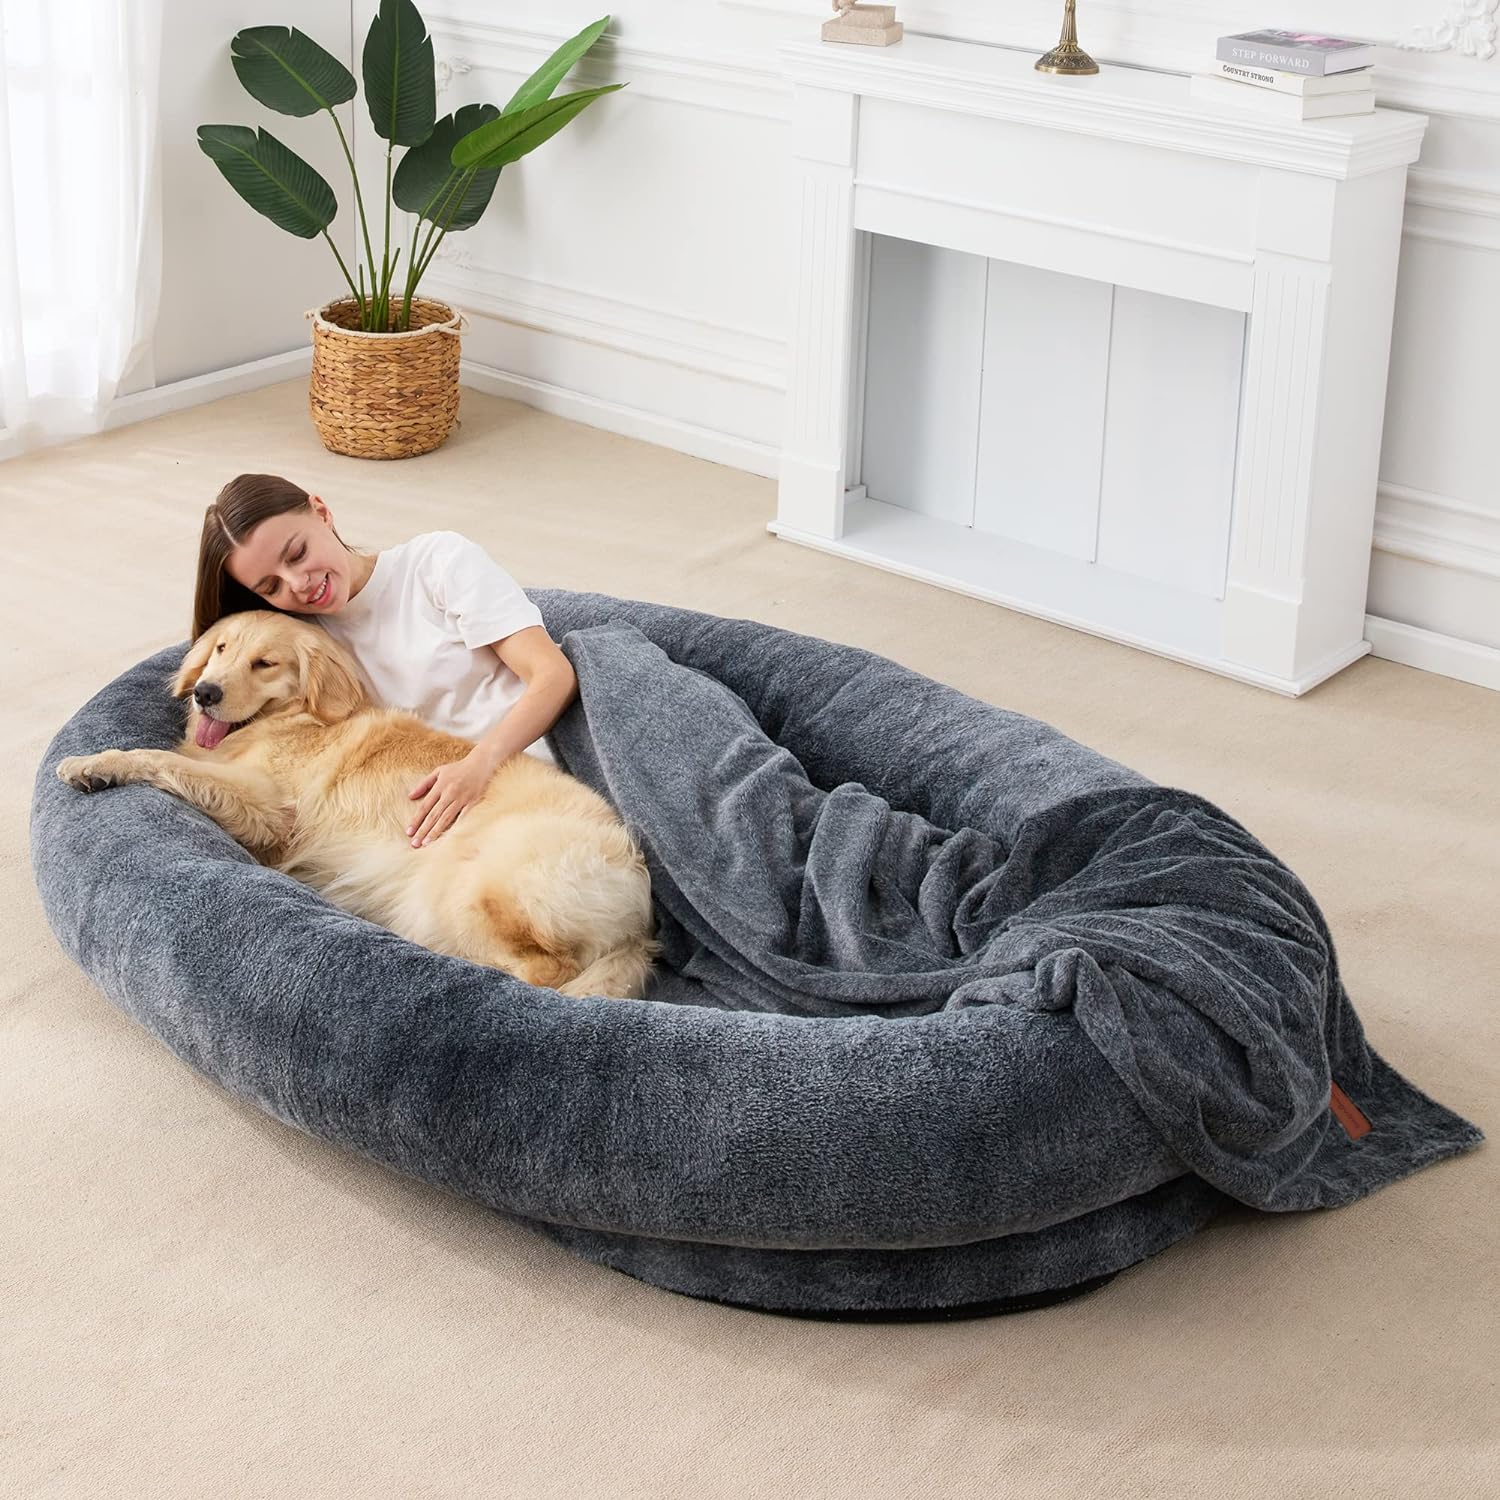 Homguava Large Human Dog Bed 72"x48"x10" Human-Sized Big Dog Bed for Adults&Pets Giant Beanbag Bed with Washable Fur Cover,Blanket and Strap(Large, Grey)